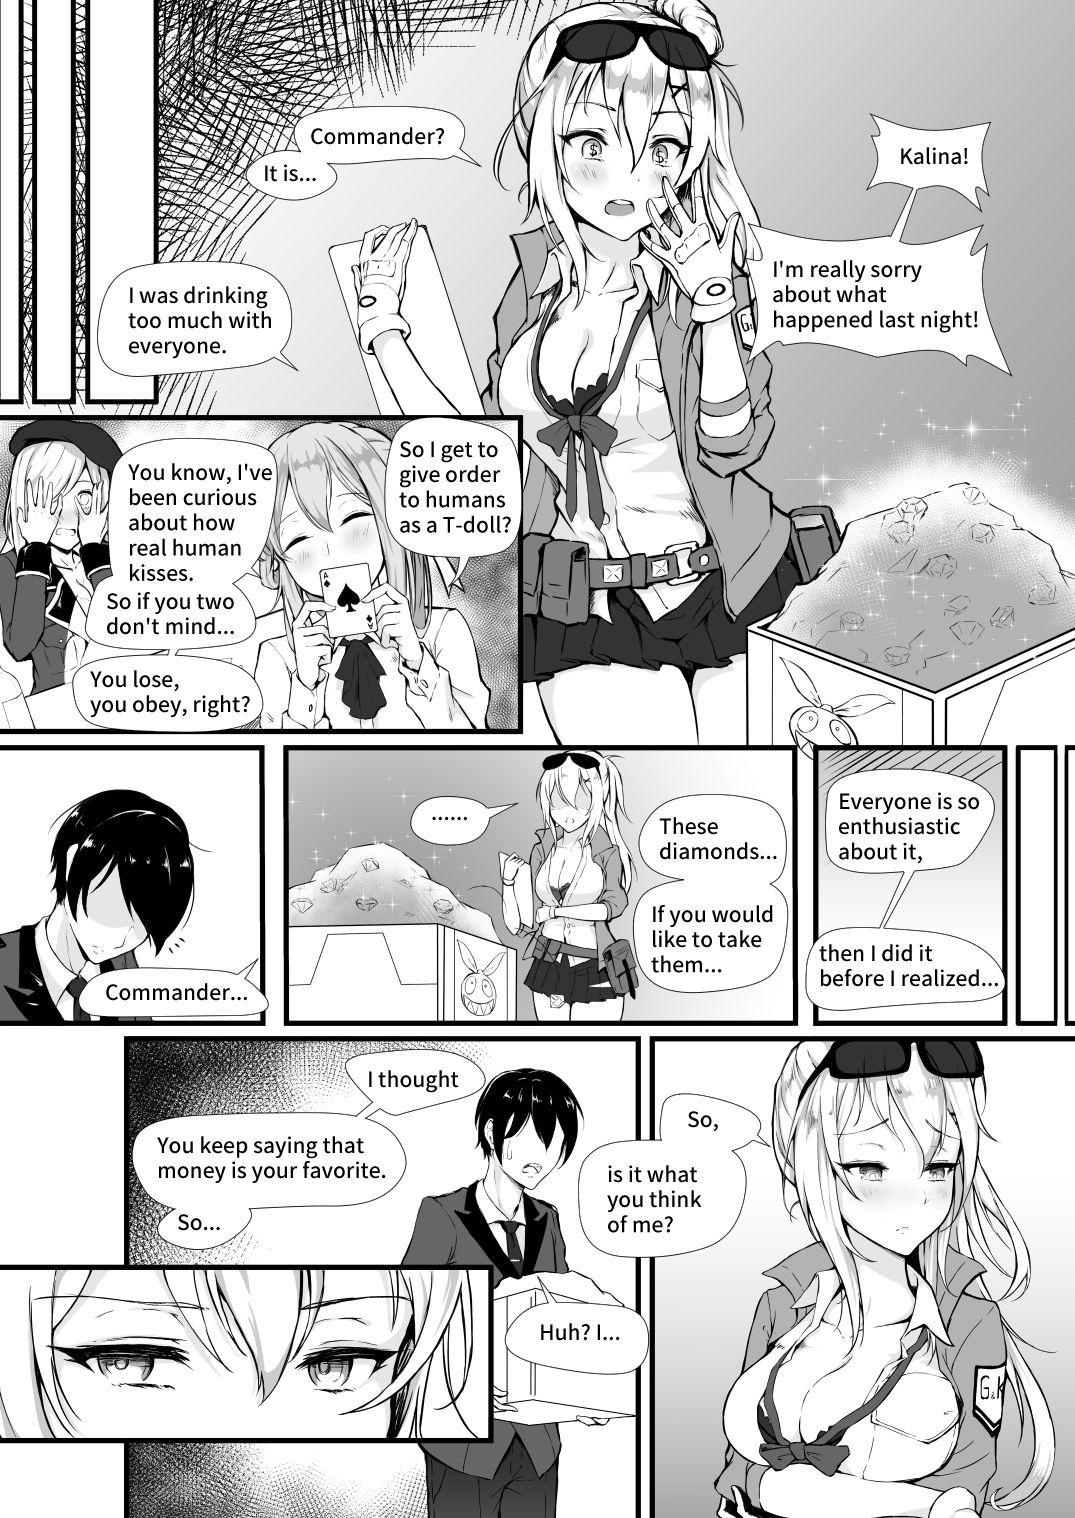 Mistress How Many Diamonds a Kiss Worth? - Girls frontline Shemale Porn - Page 5